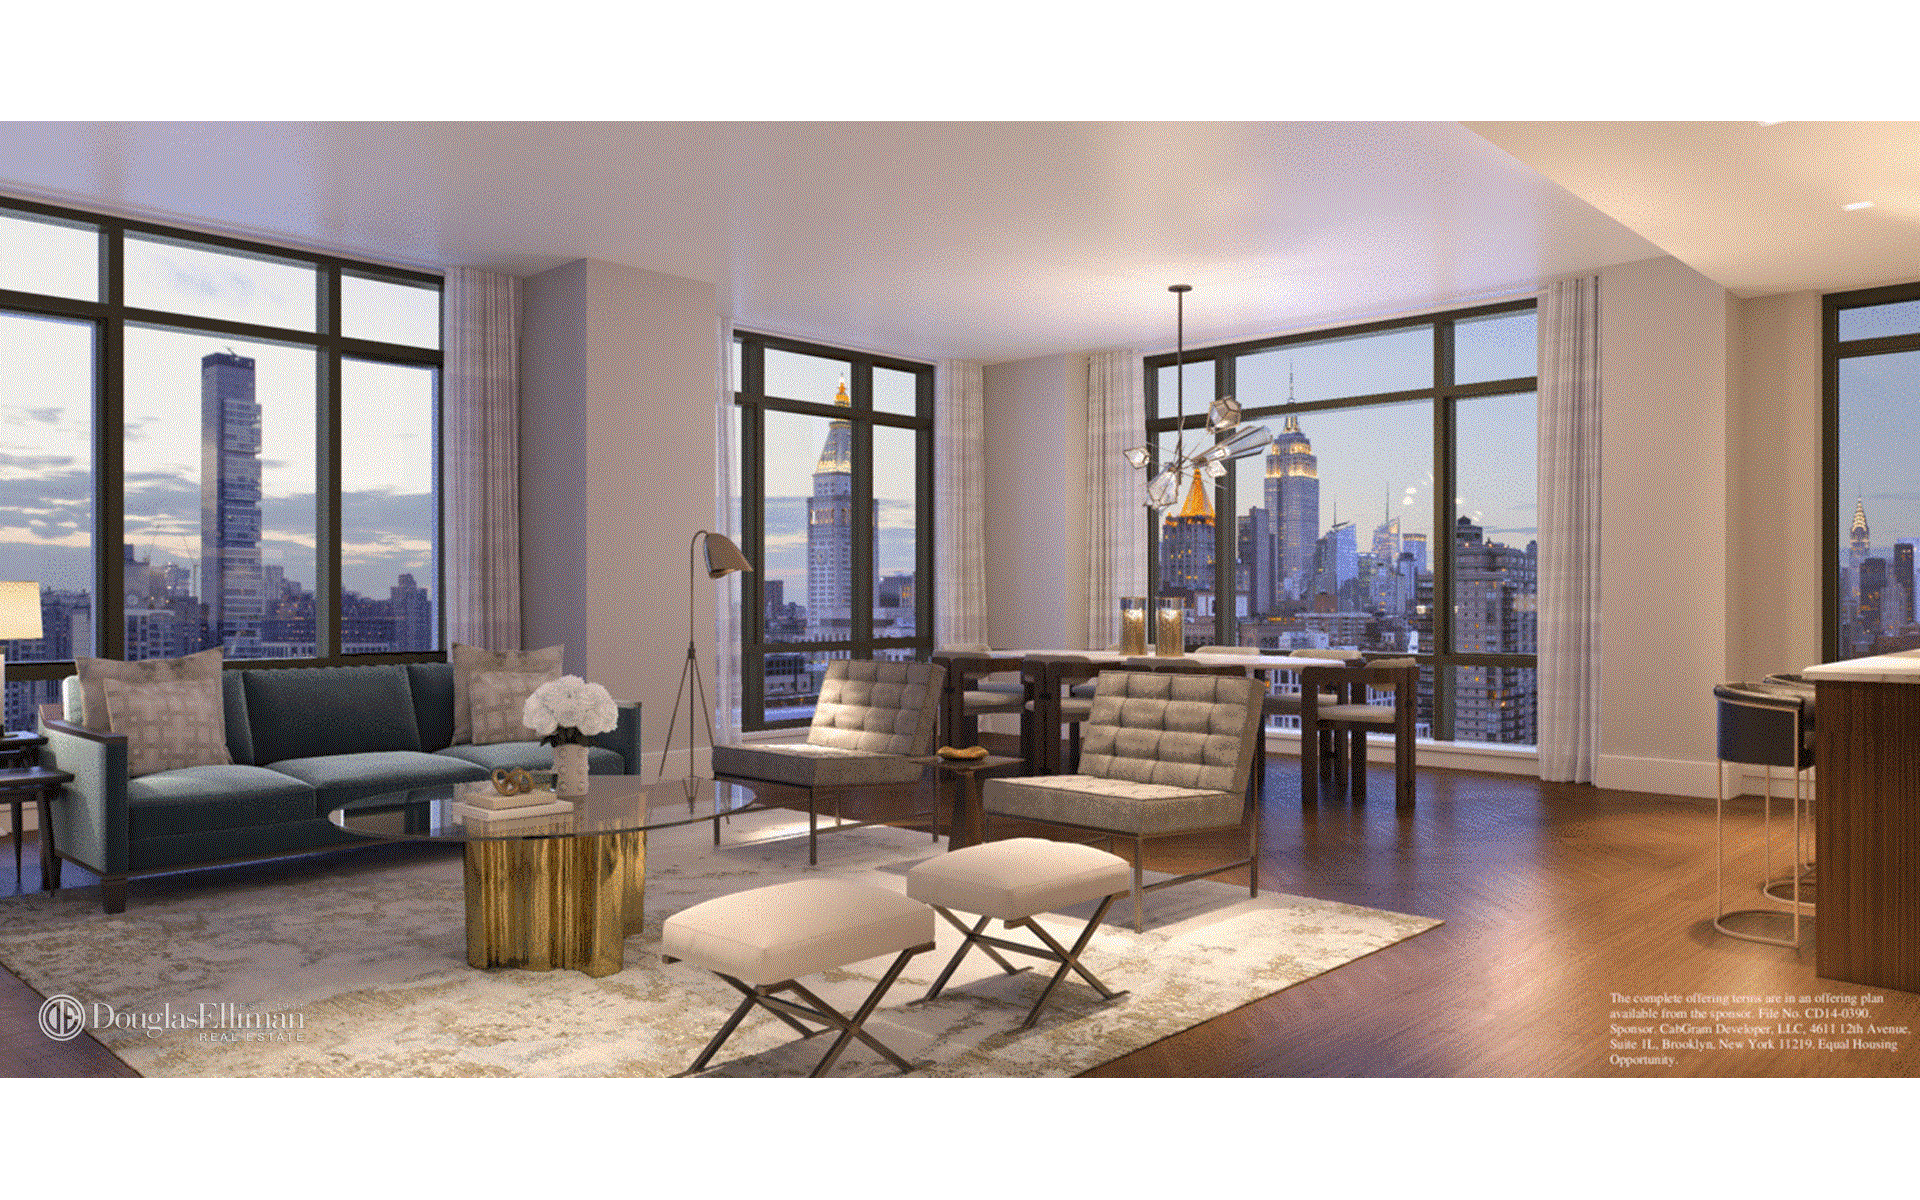 Available for Immediate Occupancy Located at 215 East 19th Street, The Tower offers a distinct collection of 130 loft like studio to four bedroom residences.